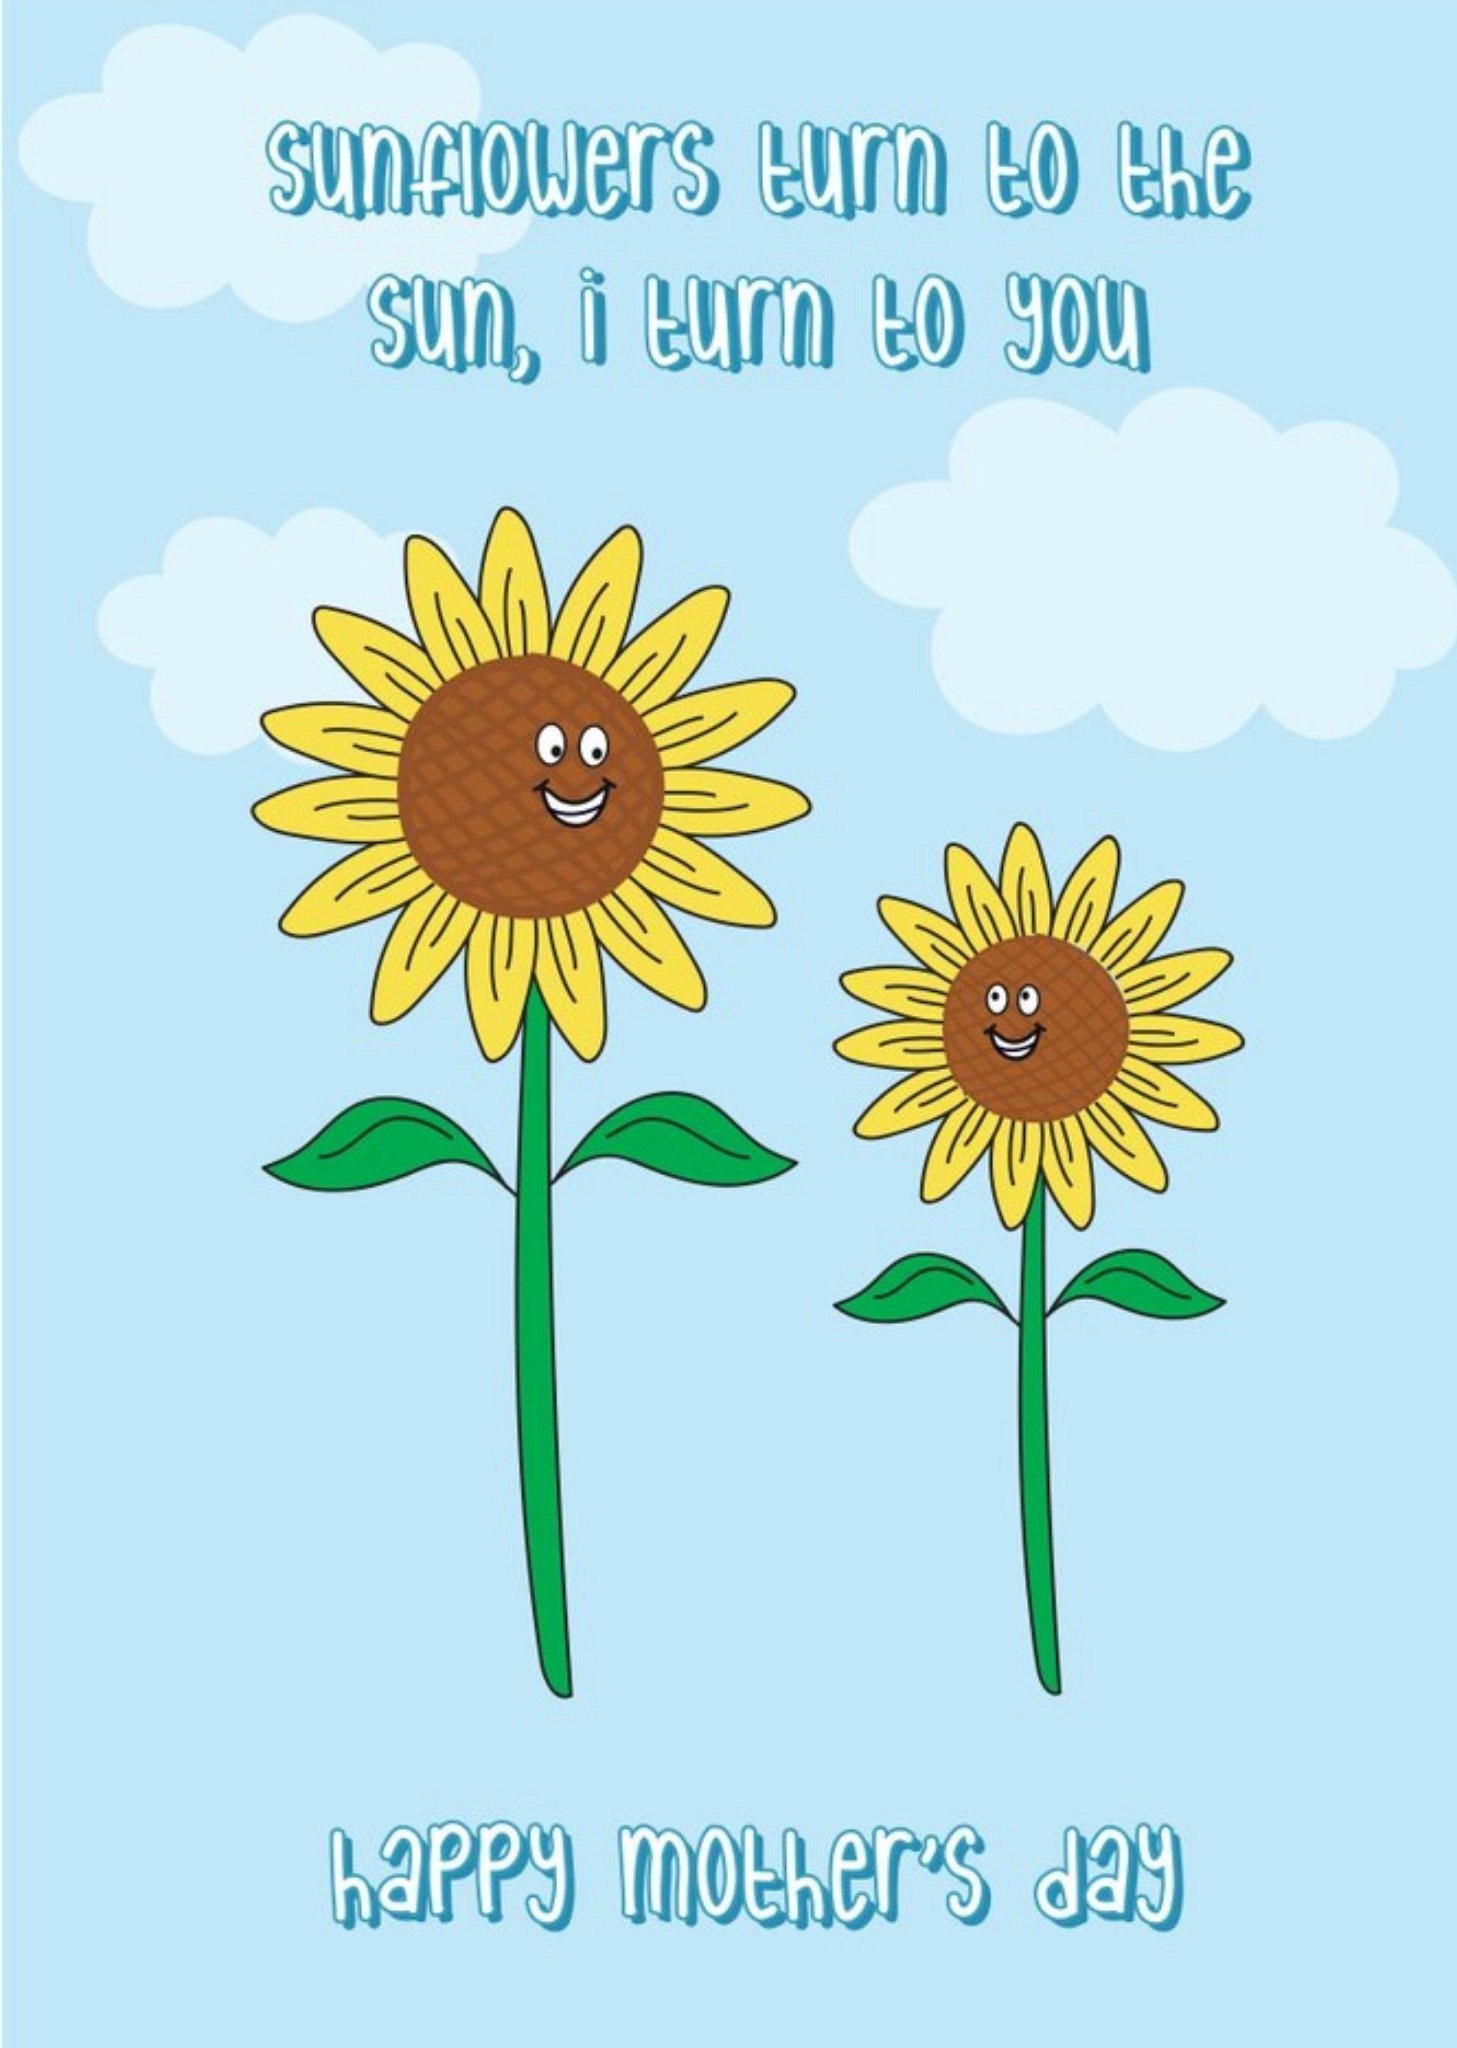 Moonpig Illustration Of Two Smiling Sunflowers Soaring In The Sky Mother's Day Card Ecard